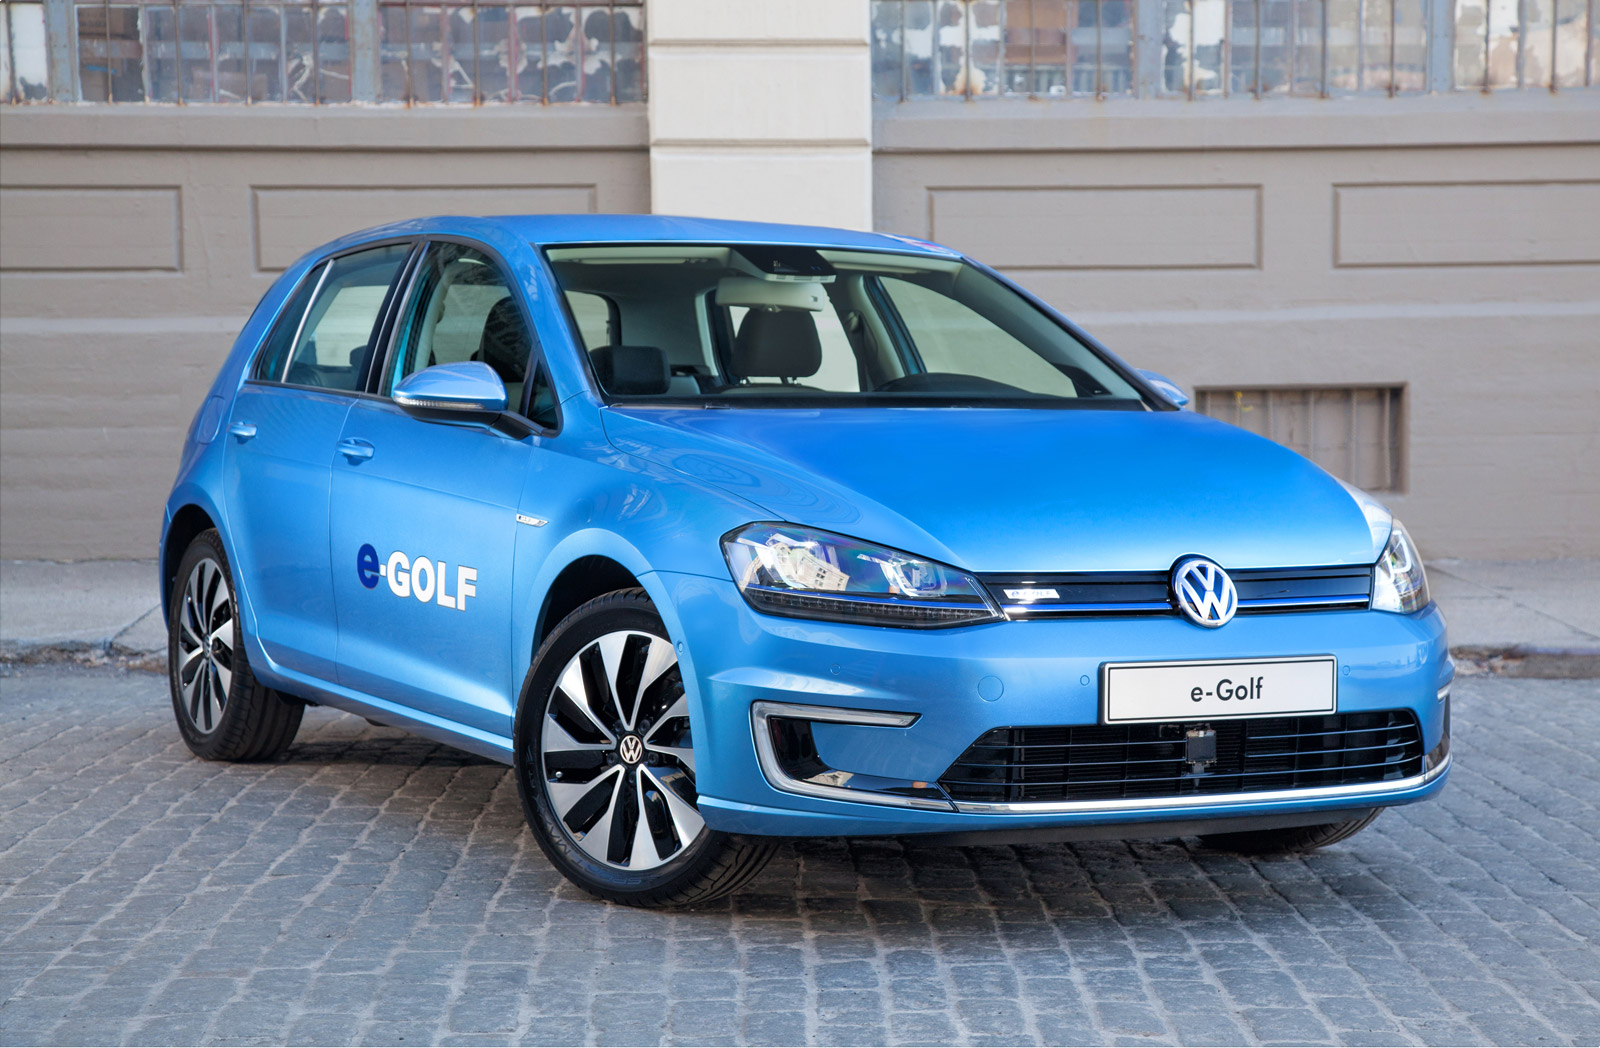 2015-volkswagen-e-golf-price-to-start-at-36-265-top-trim-level-only